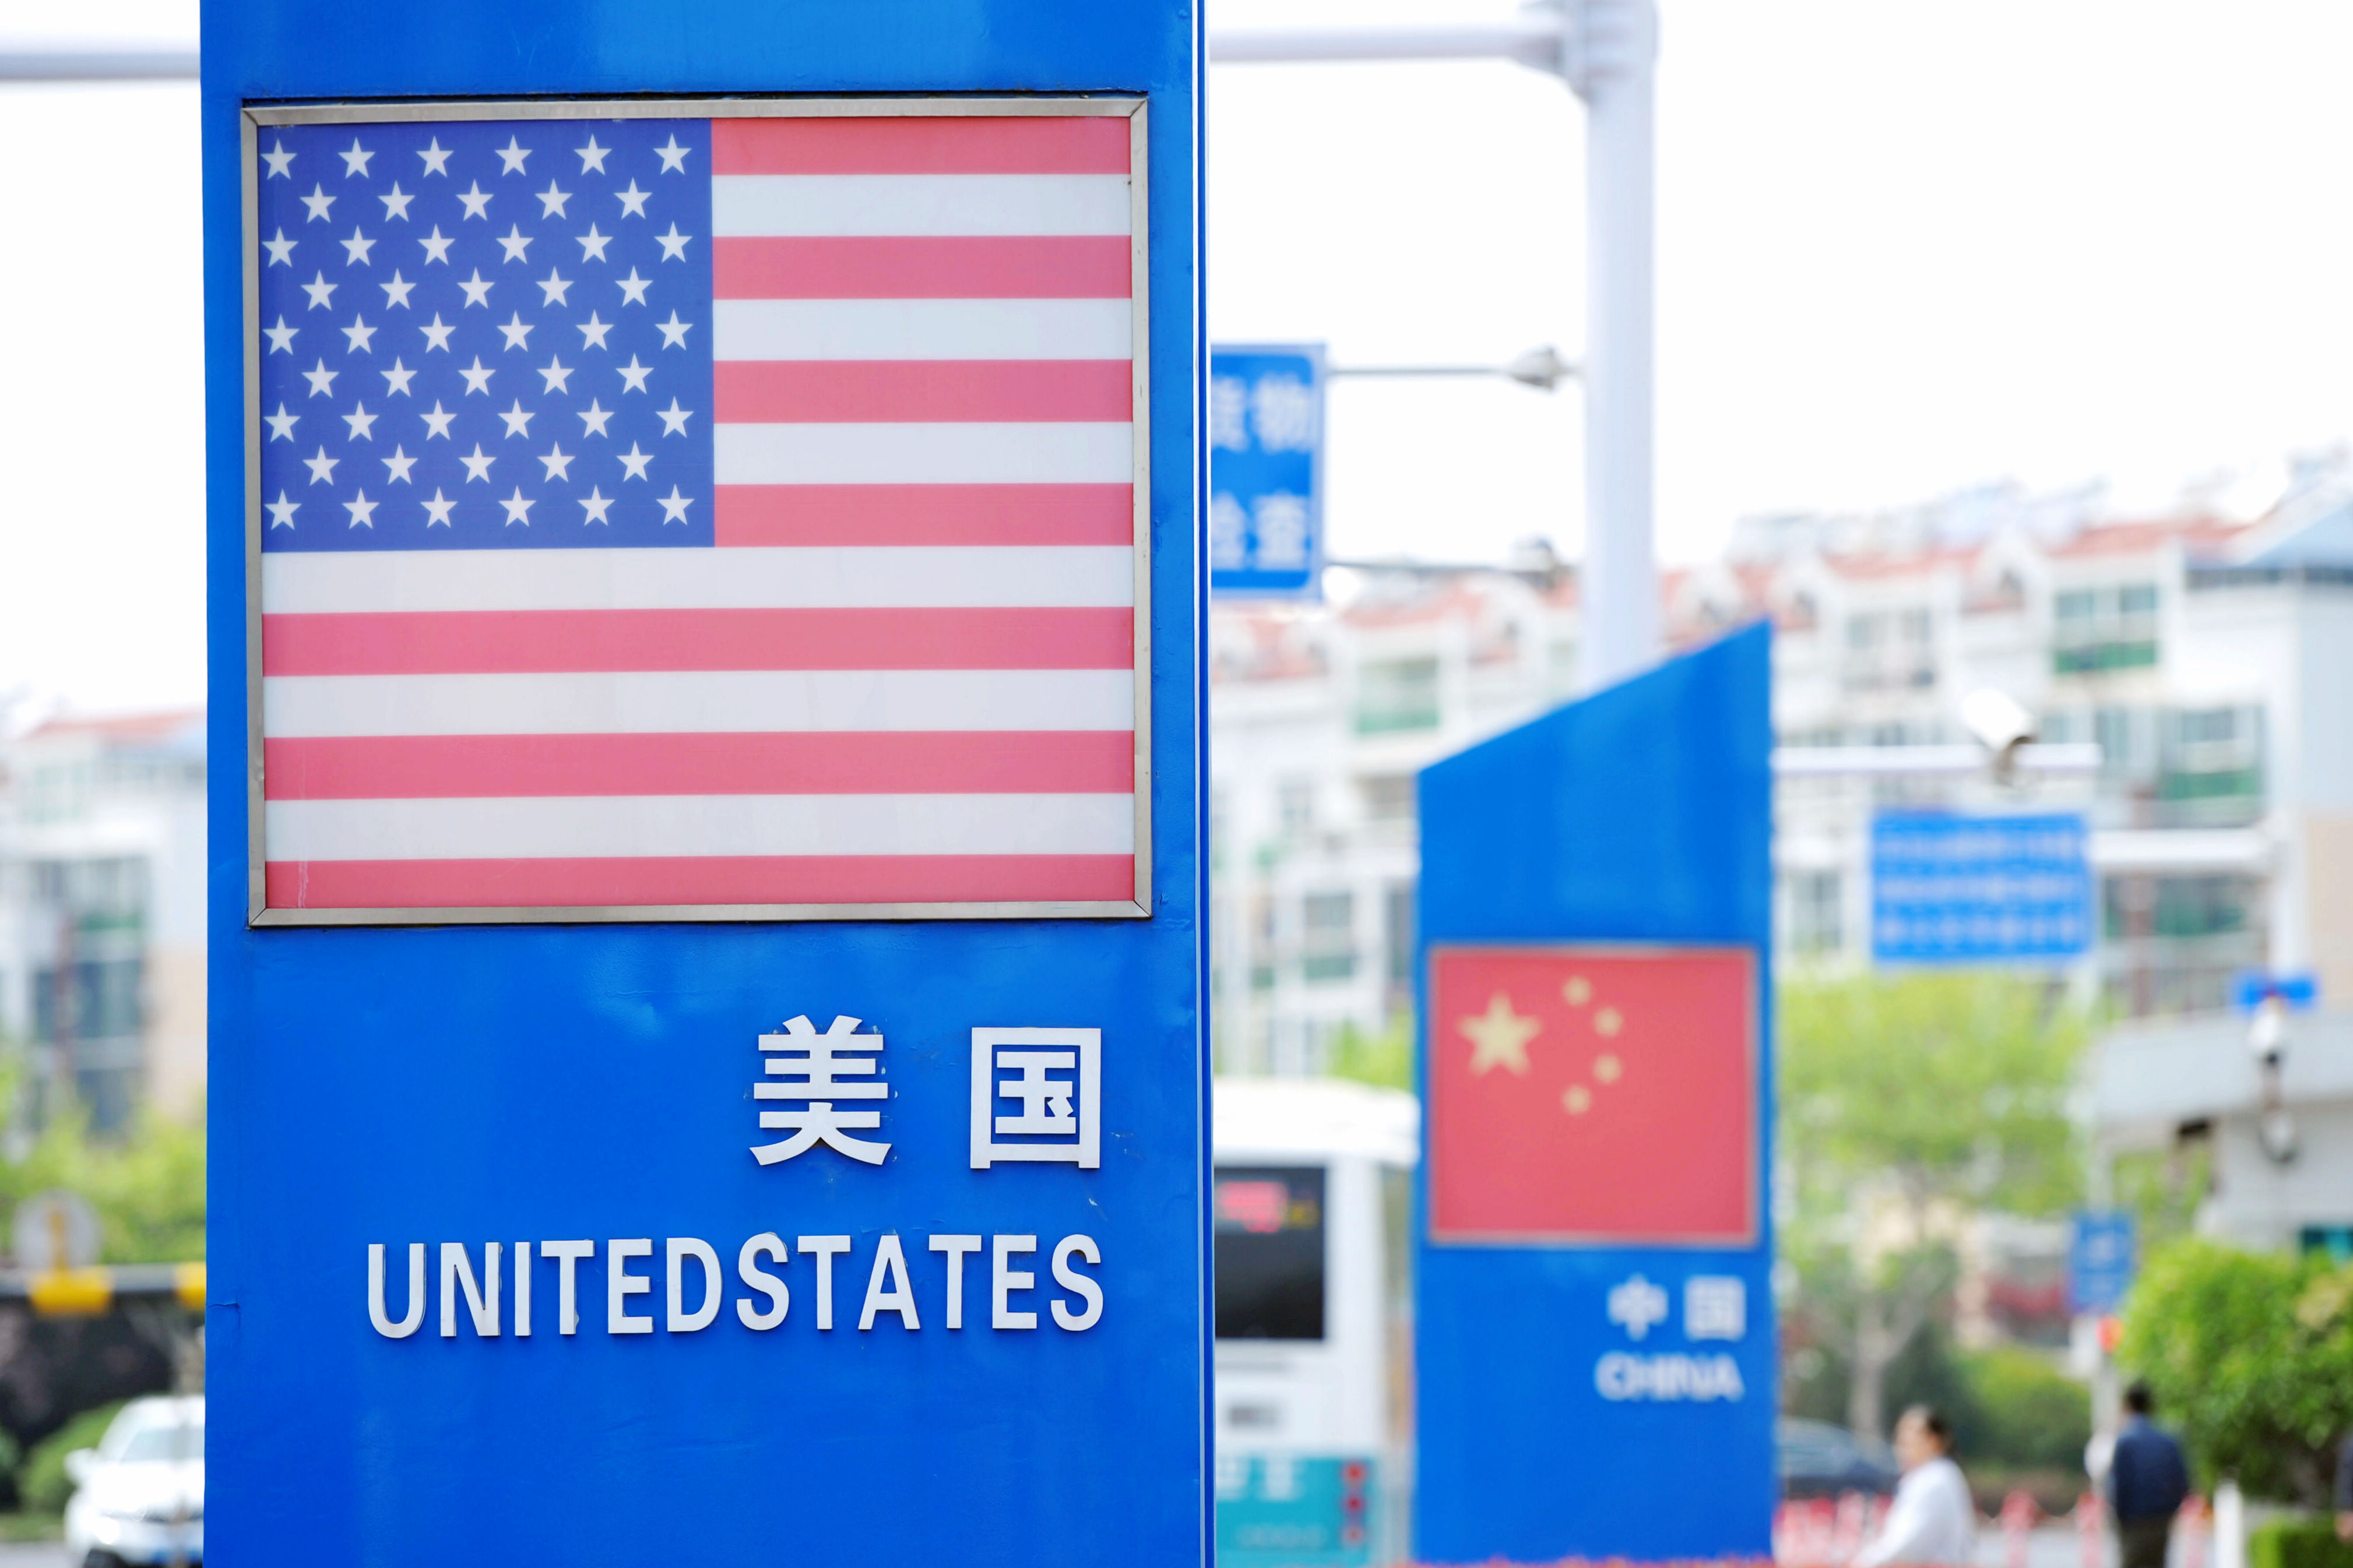 --FILE--Signboards showing the flag of the United States and Chinese National Flag are seen on a street in Qingdao city, east China's Shandong province, 8 May 2019.

China will keep calm against threats of higher tariffs from the United States and has ¡°complete confidence¡± in its ability to face challenges in trade talks, a commentary in China¡¯s top newspaper said on Wednesday.No Use China. No Use France.